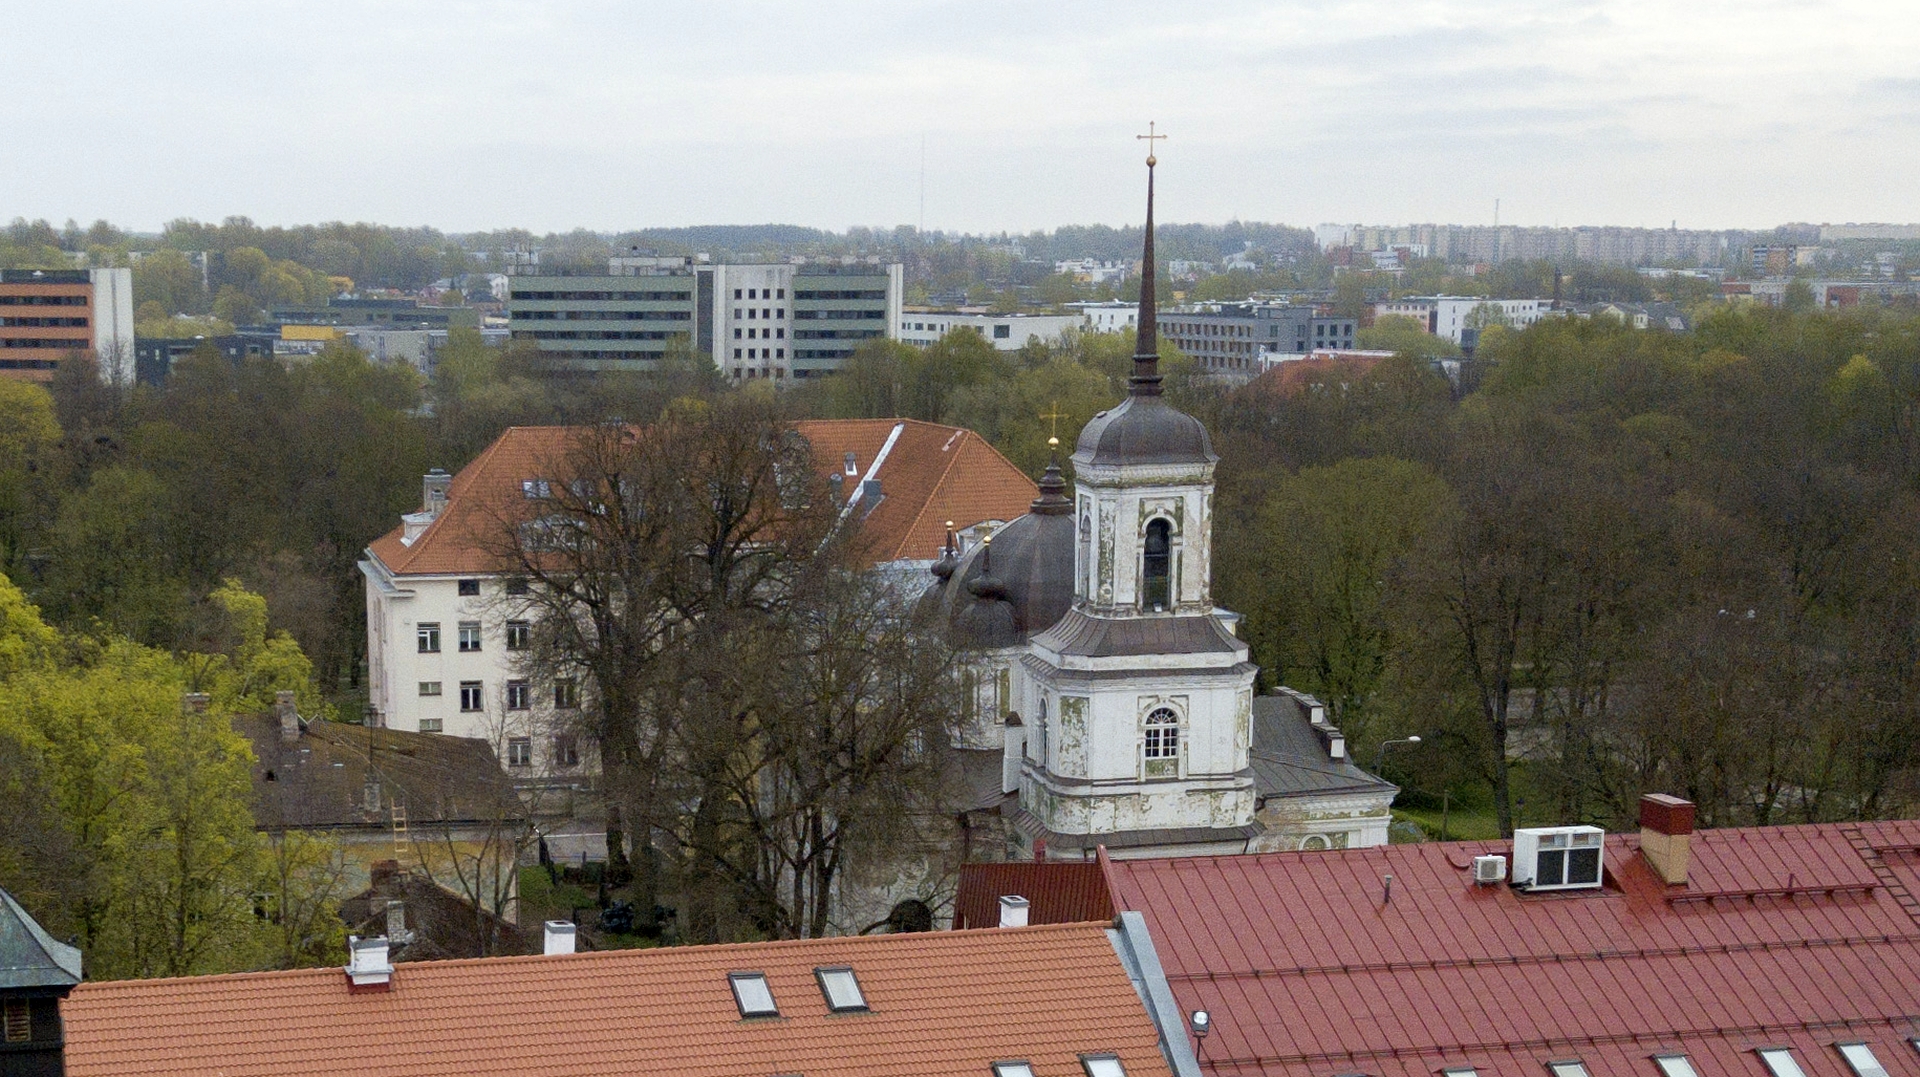 Tartu. View of the city from the tower of the Jan Church rephoto